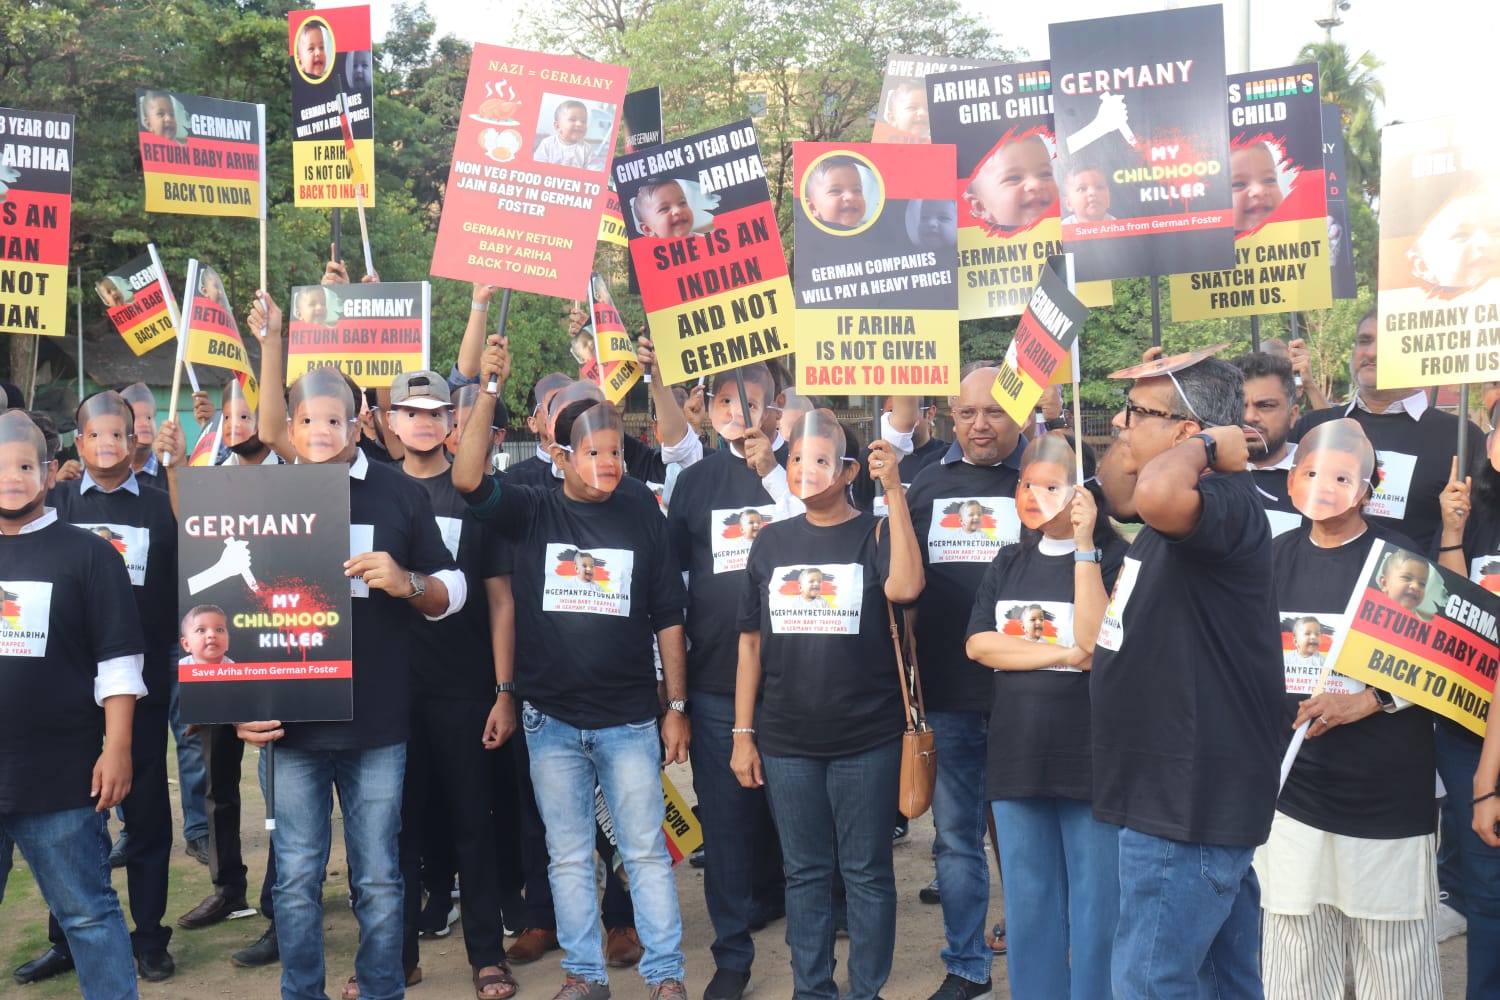 Massive Protests in Mumbai: Ariha Shah's Justice Campaign Gains Momentum as Gujarati and Business Communities Rally Outside German Consulate and Azad Maidan